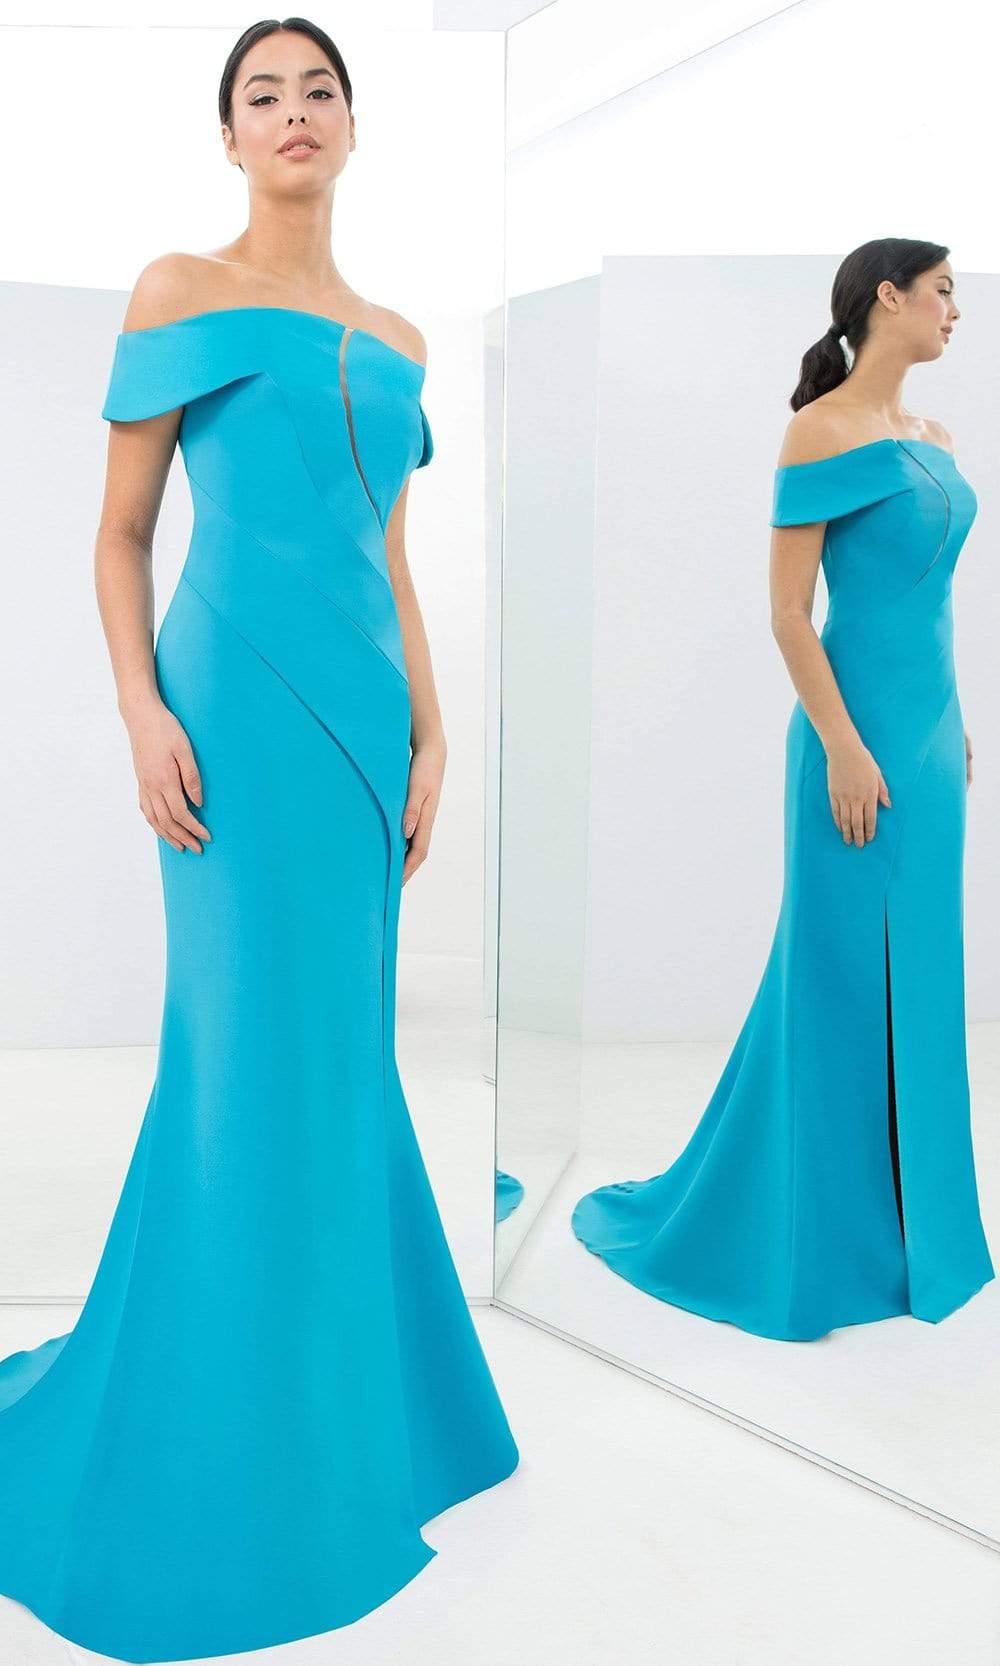 Alexander By Daymor - 1373 Off-Shoulder Front Cutout Mermaid Gown Evening Dresses 00 / Lagoon